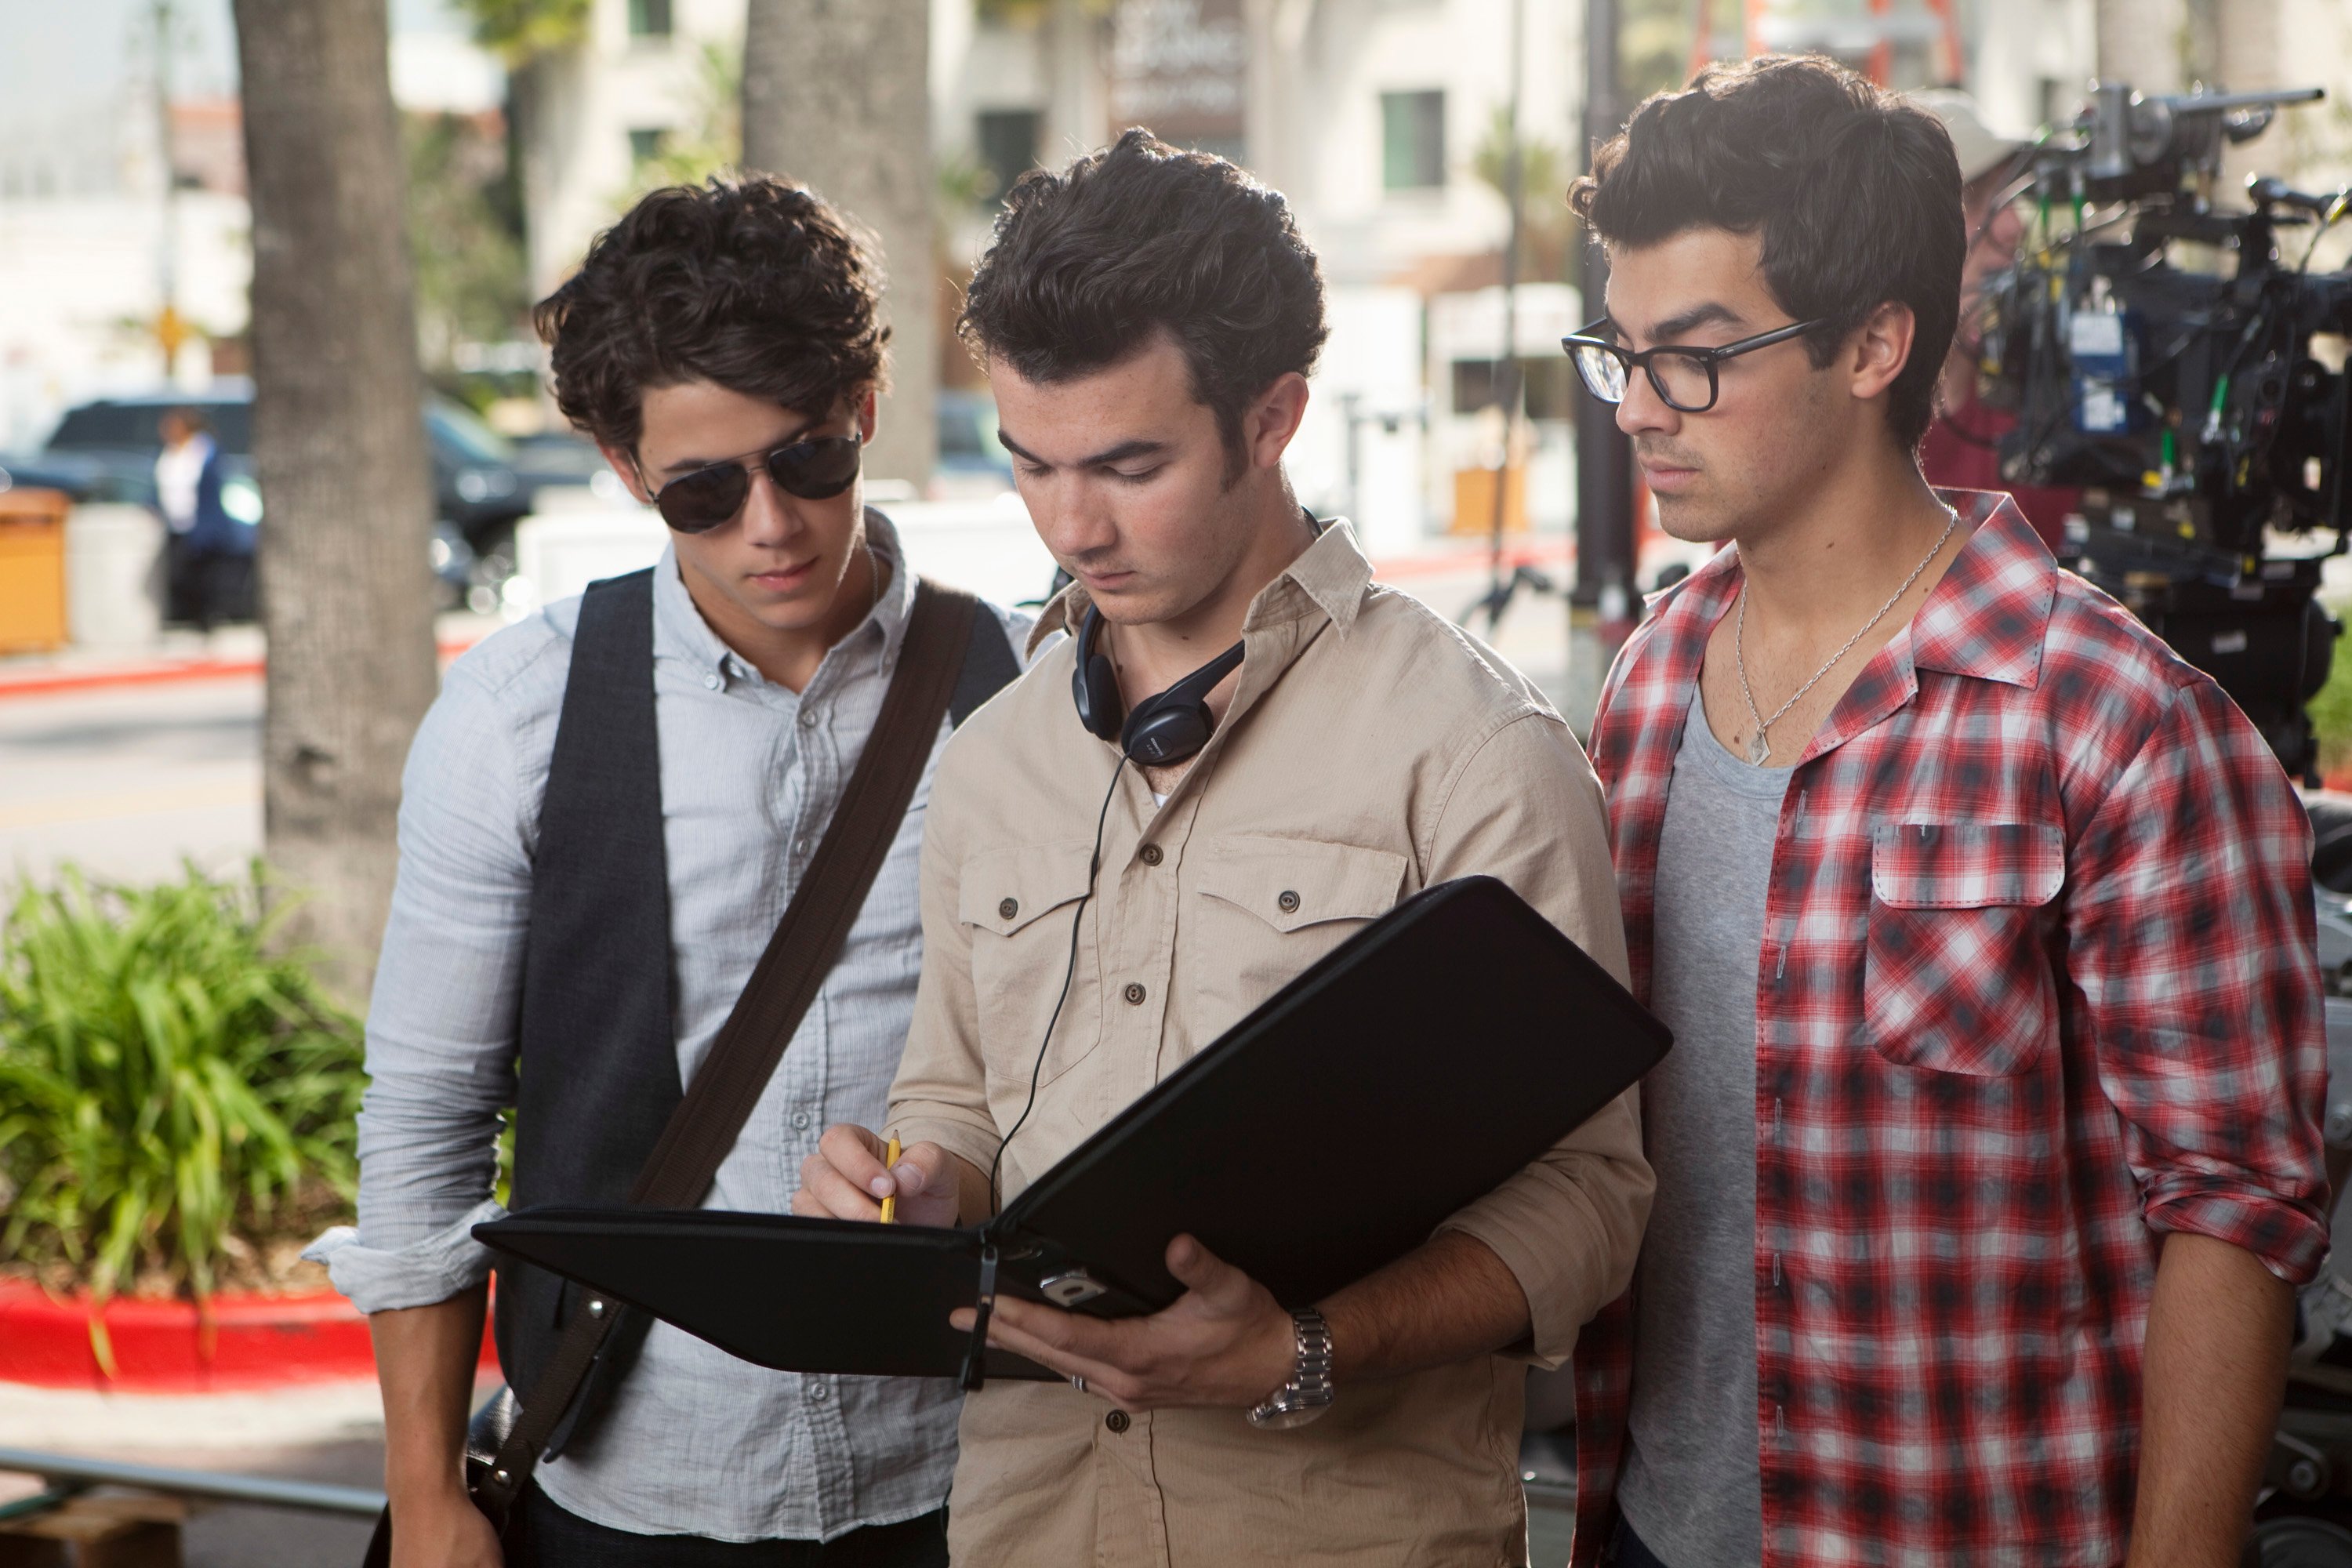 Disney Channel's 'Jonas L.A.' episode titled 'Direct to Video'